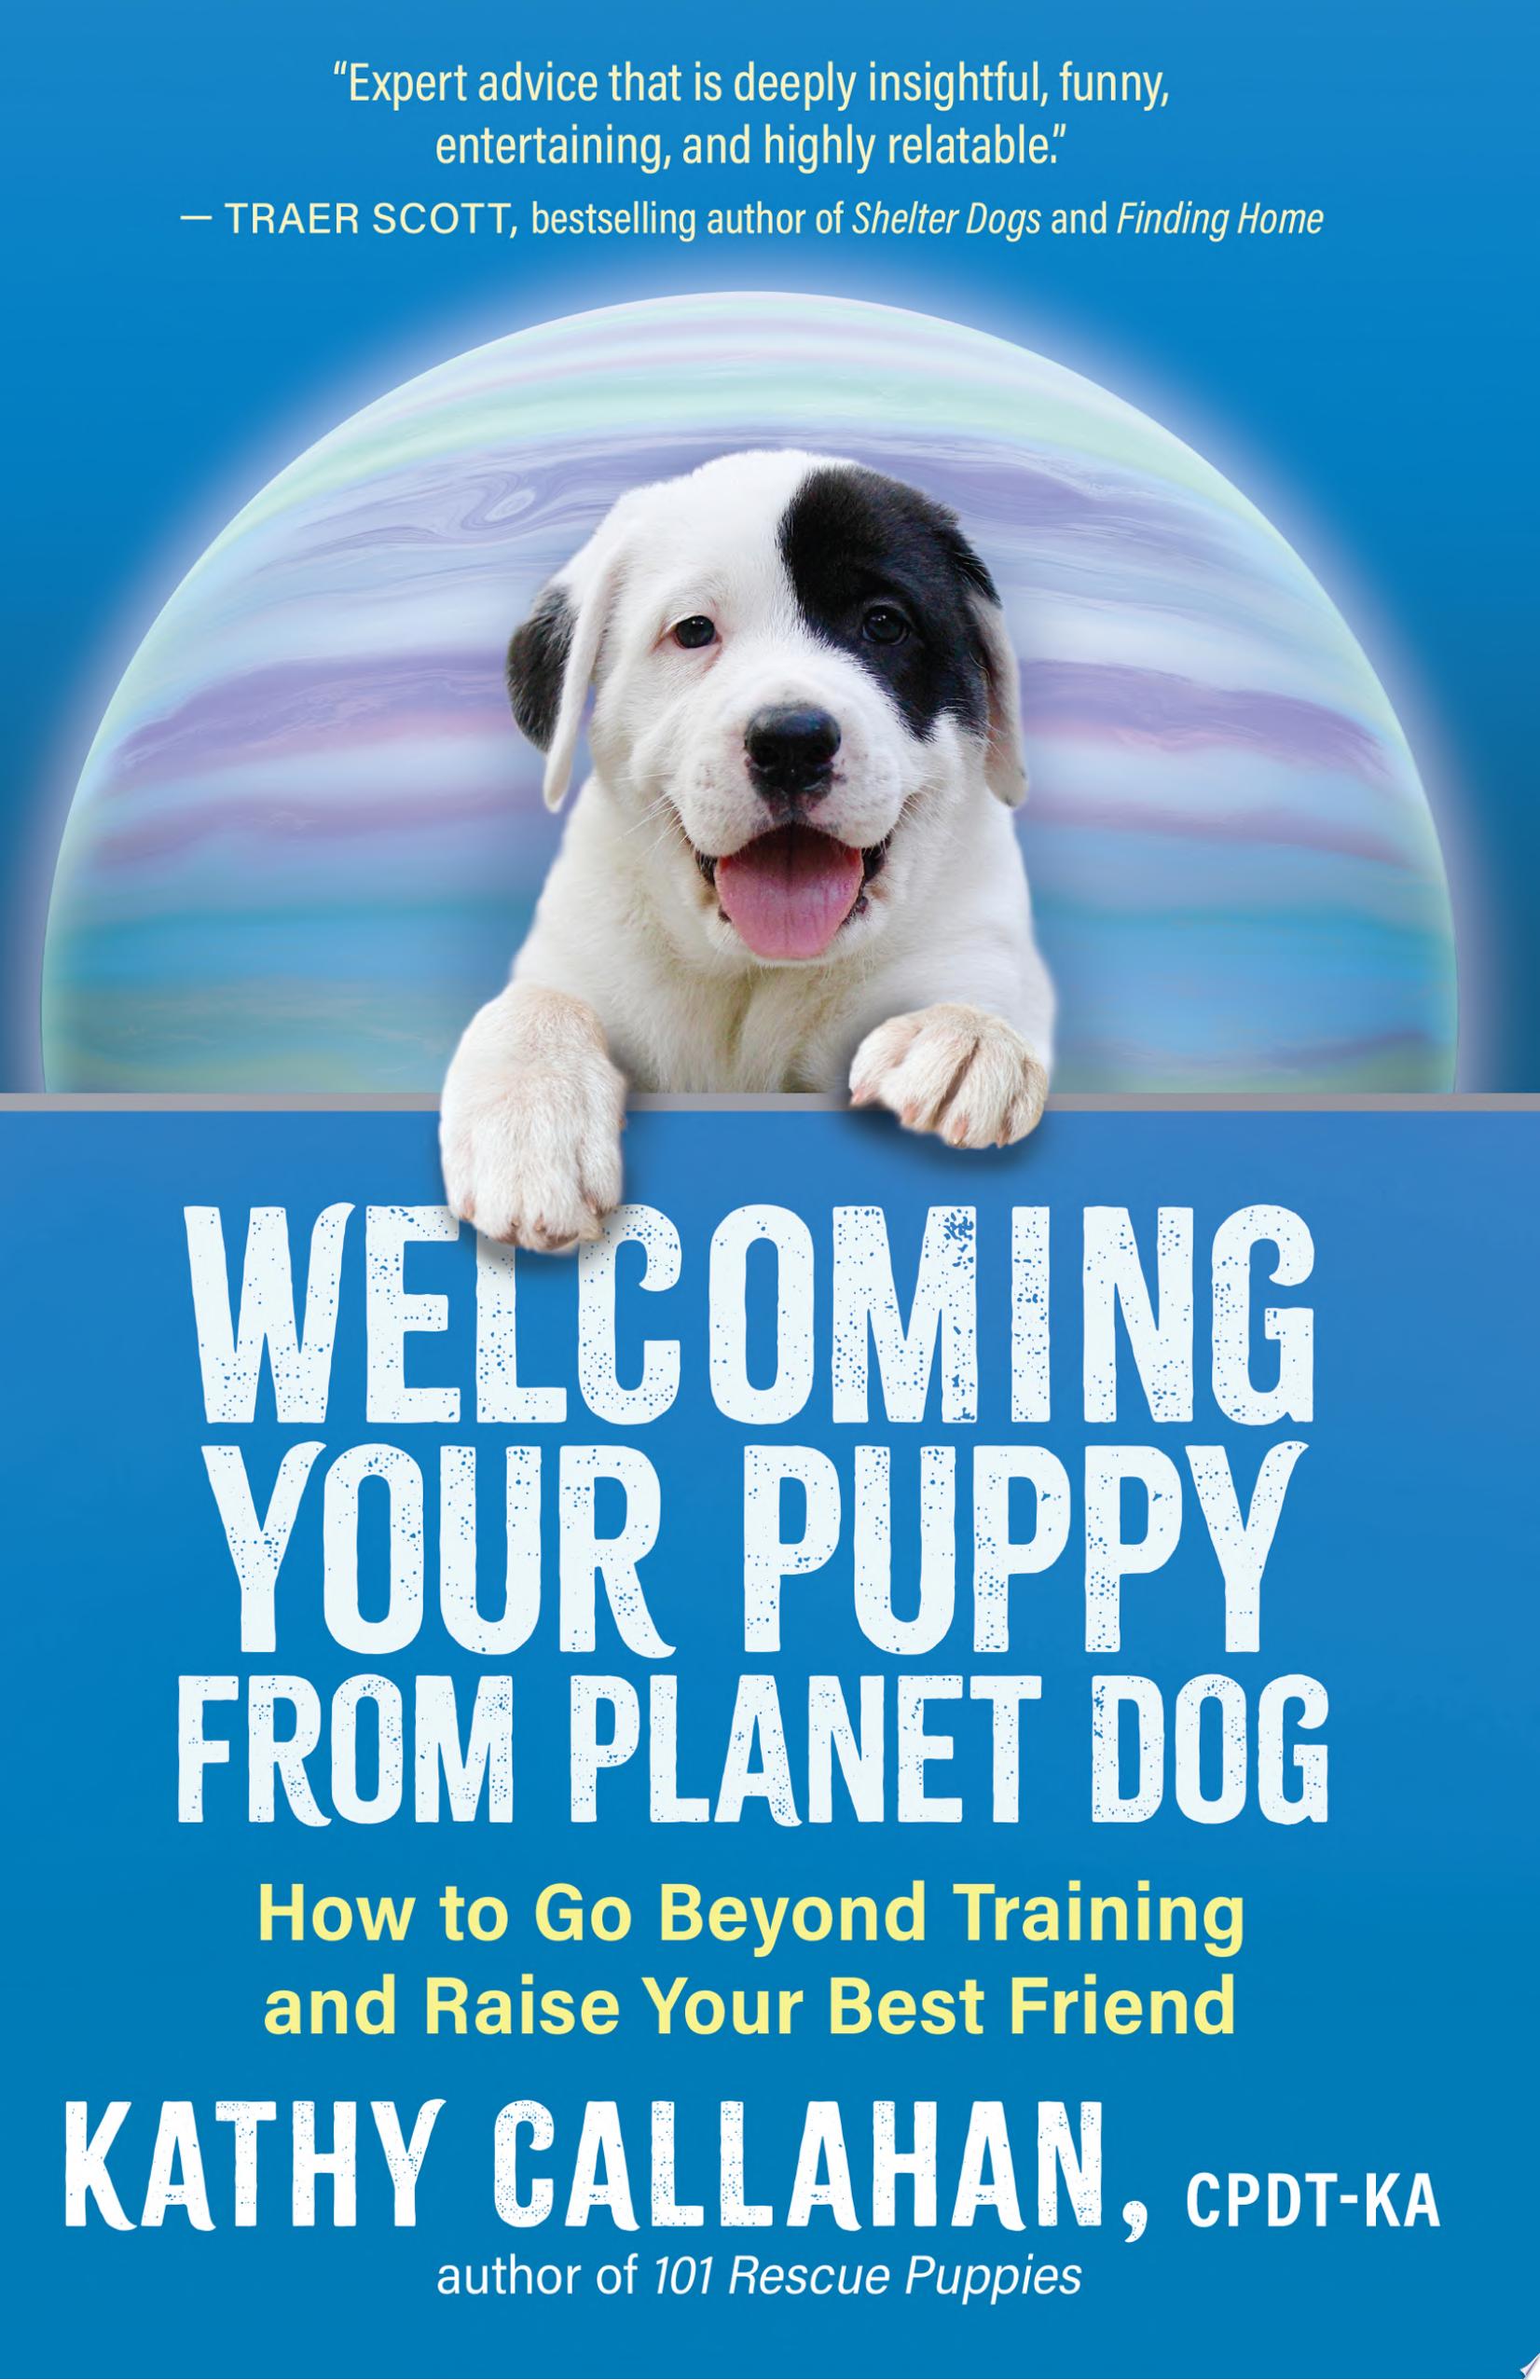 Image for "Welcoming Your Puppy from Planet Dog"